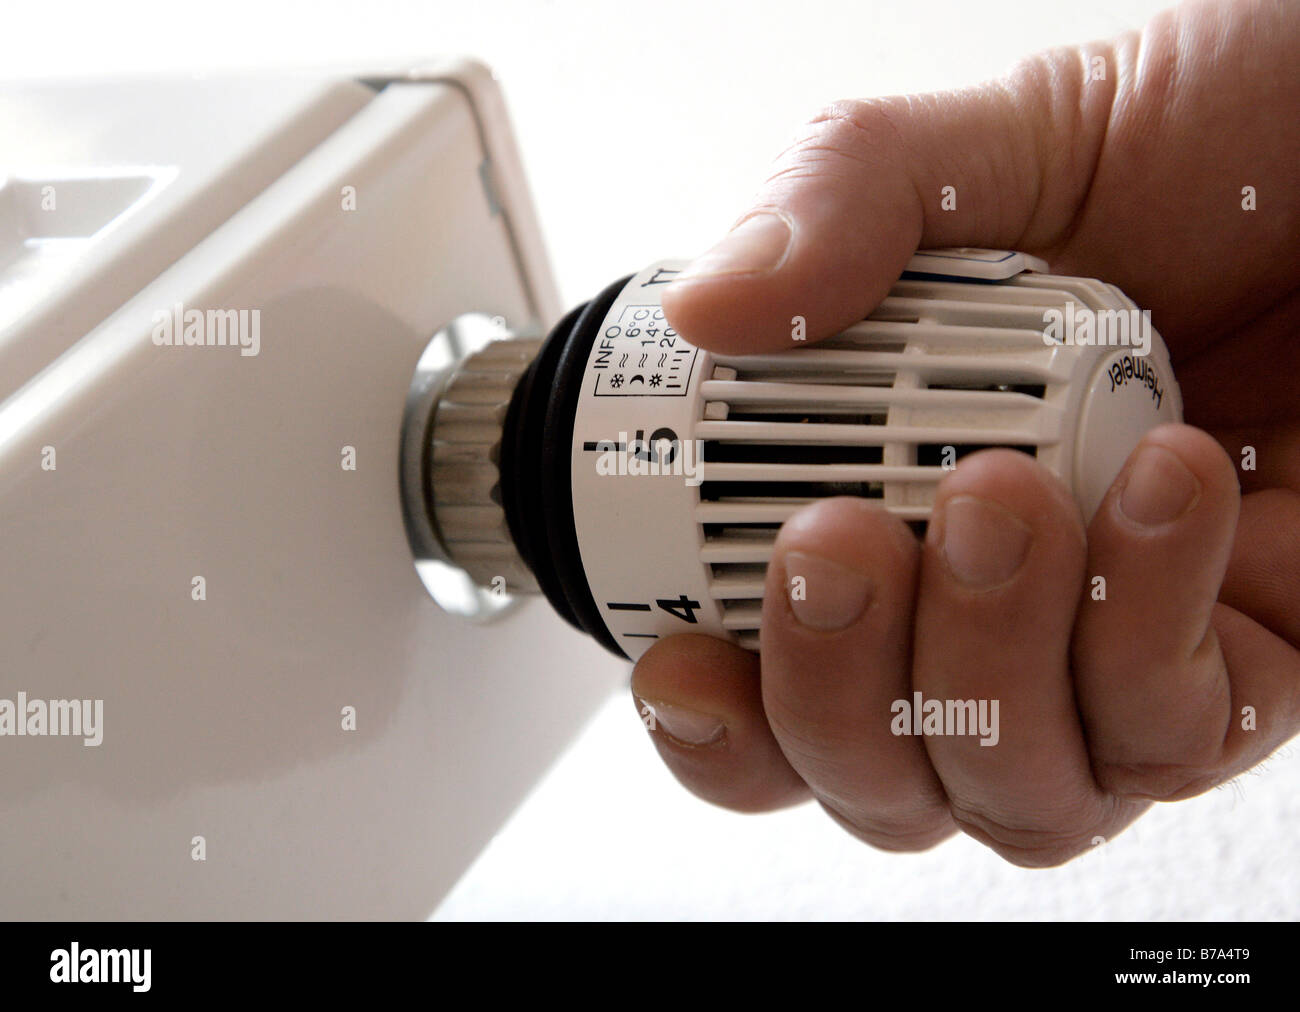 Hand turning a heating thermostat, Germany, Europe Stock Photo